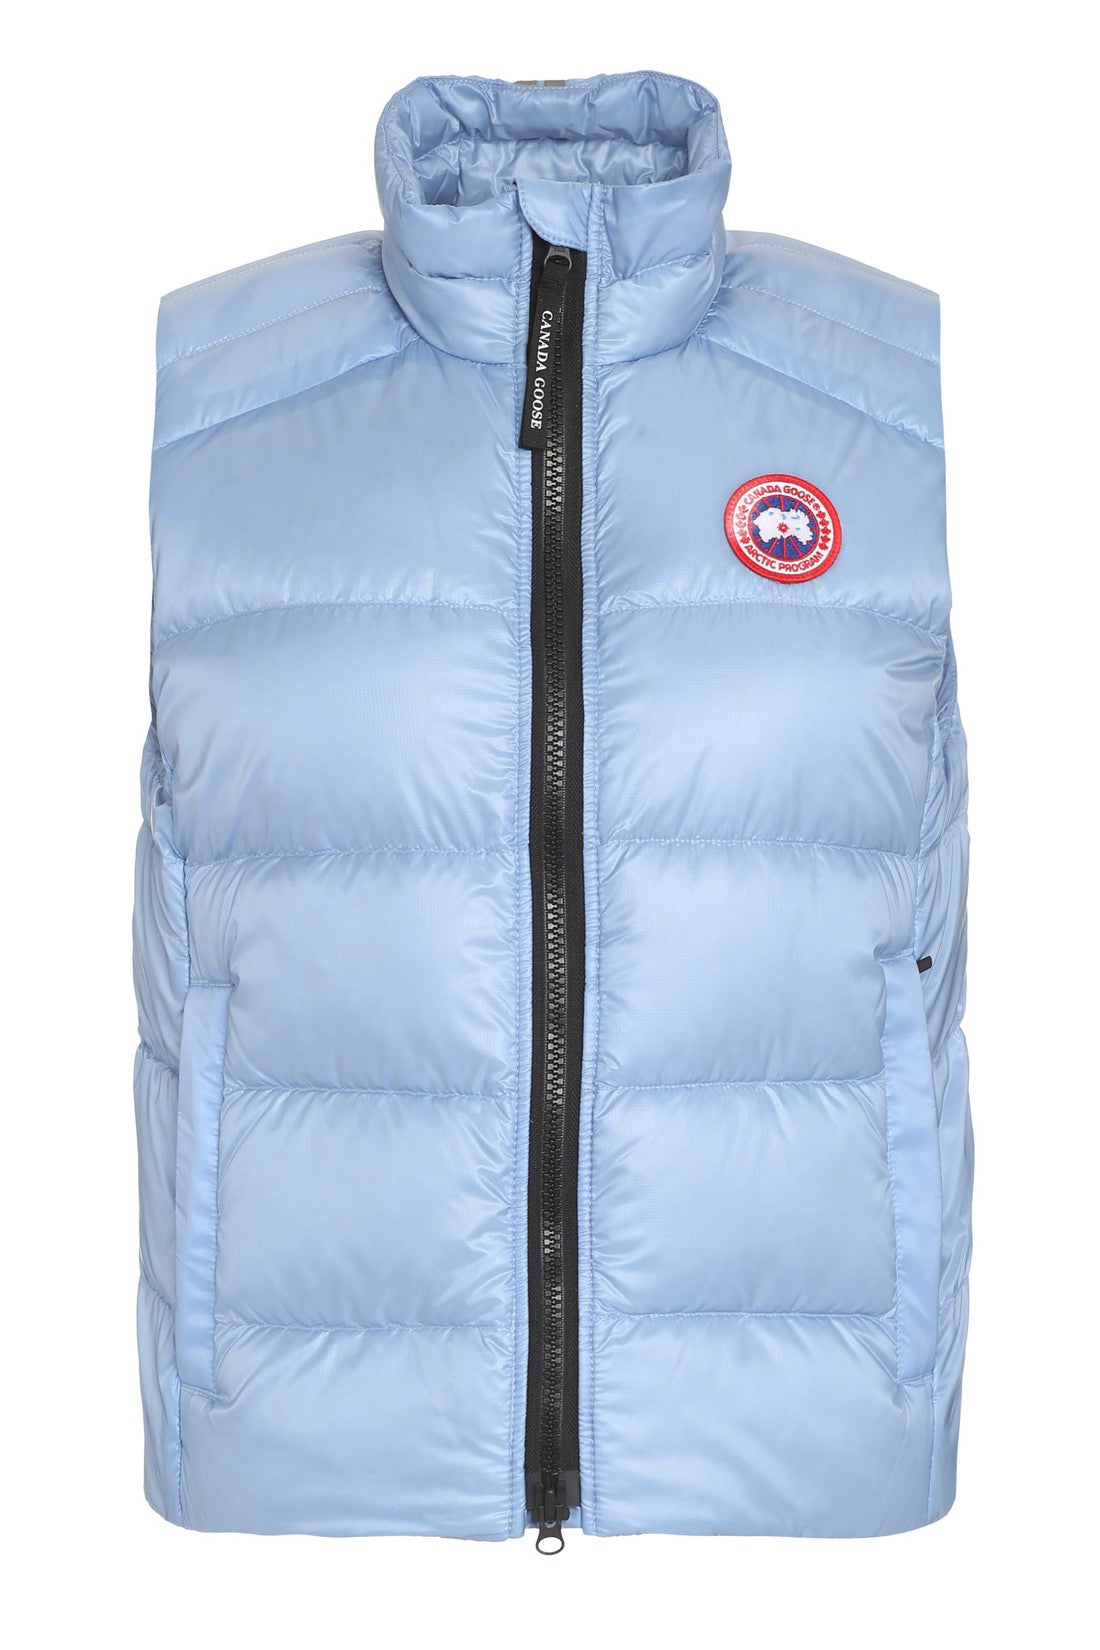 Canada Goose-OUTLET-SALE-Cypress padded bodywarmer-ARCHIVIST